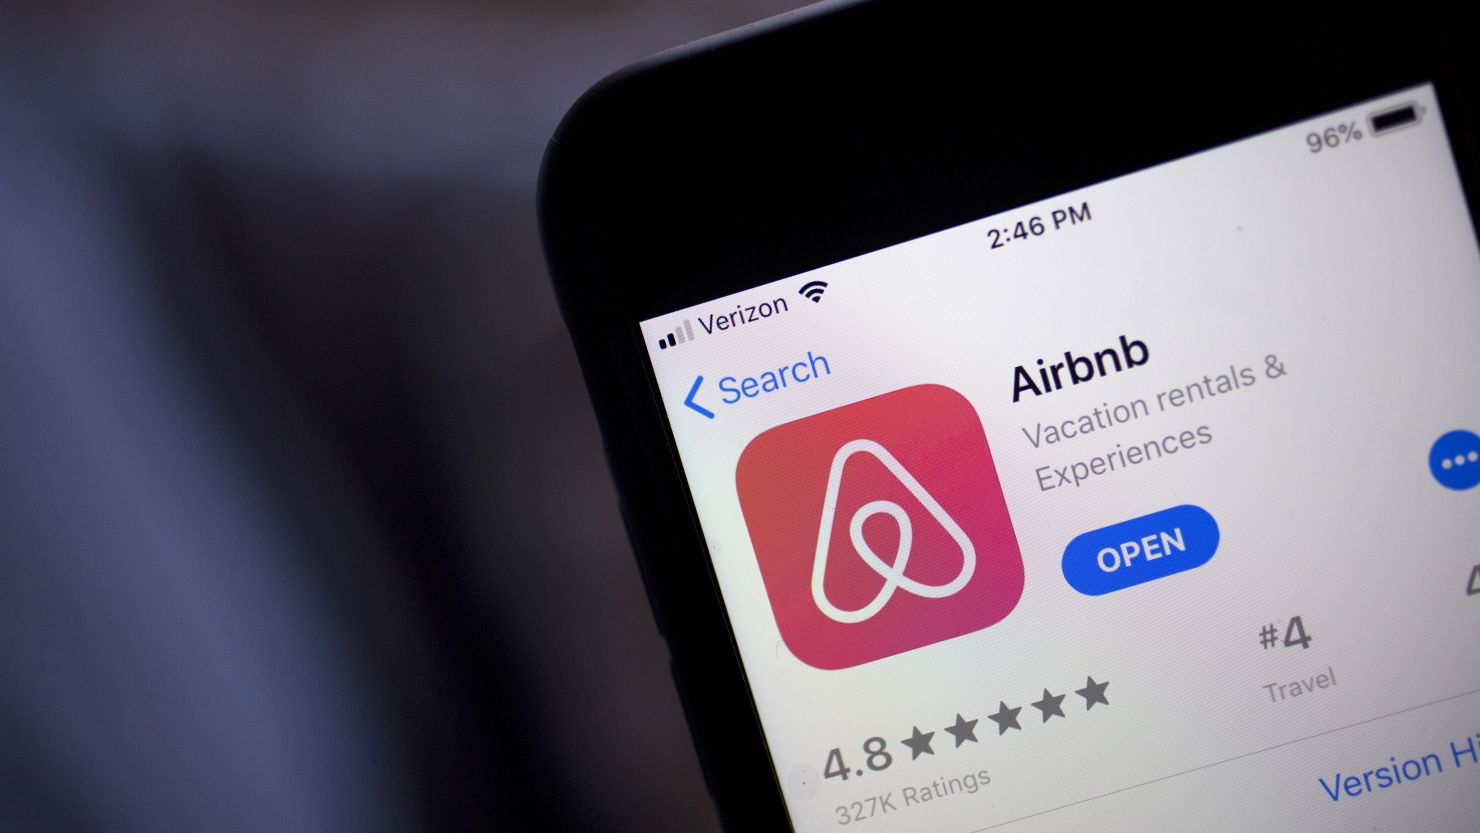 Airbnb is working with cities and states to advocate for short-term rental rules that allow renters to share their home.